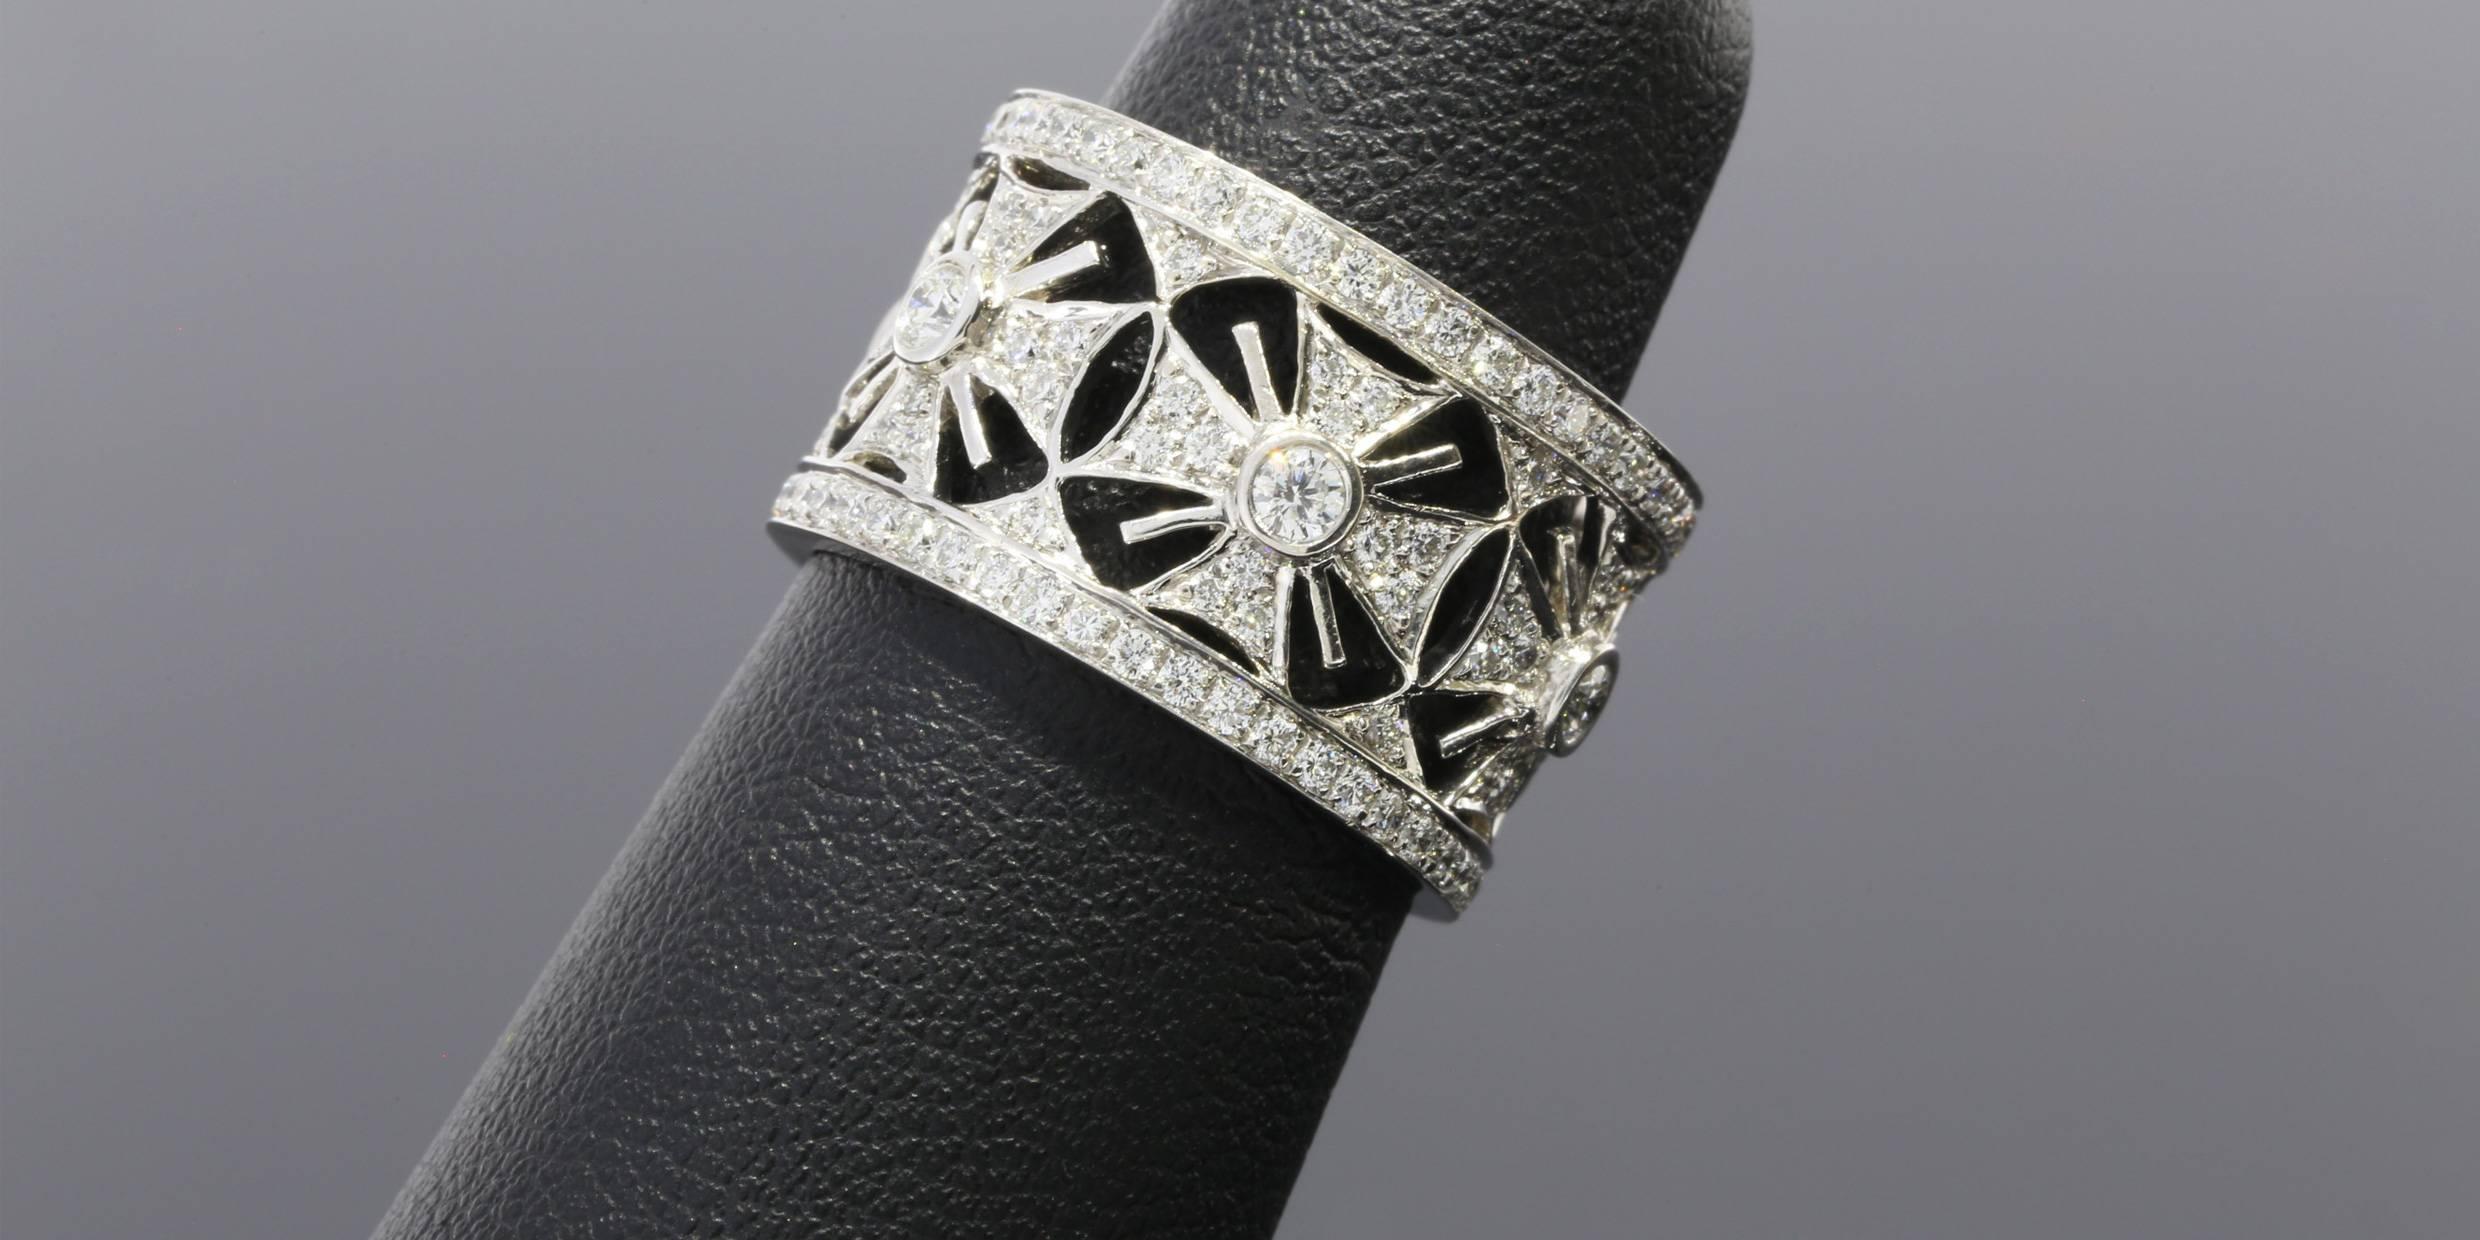 This one-of-a-kind band ring was custom made to feature a vintage inspired design of Maltese crosses in diamonds & white gold. The diamonds have a combined total weight of 1 carat & are bead & bezel set. The ring is comprised of 18 karat white gold.